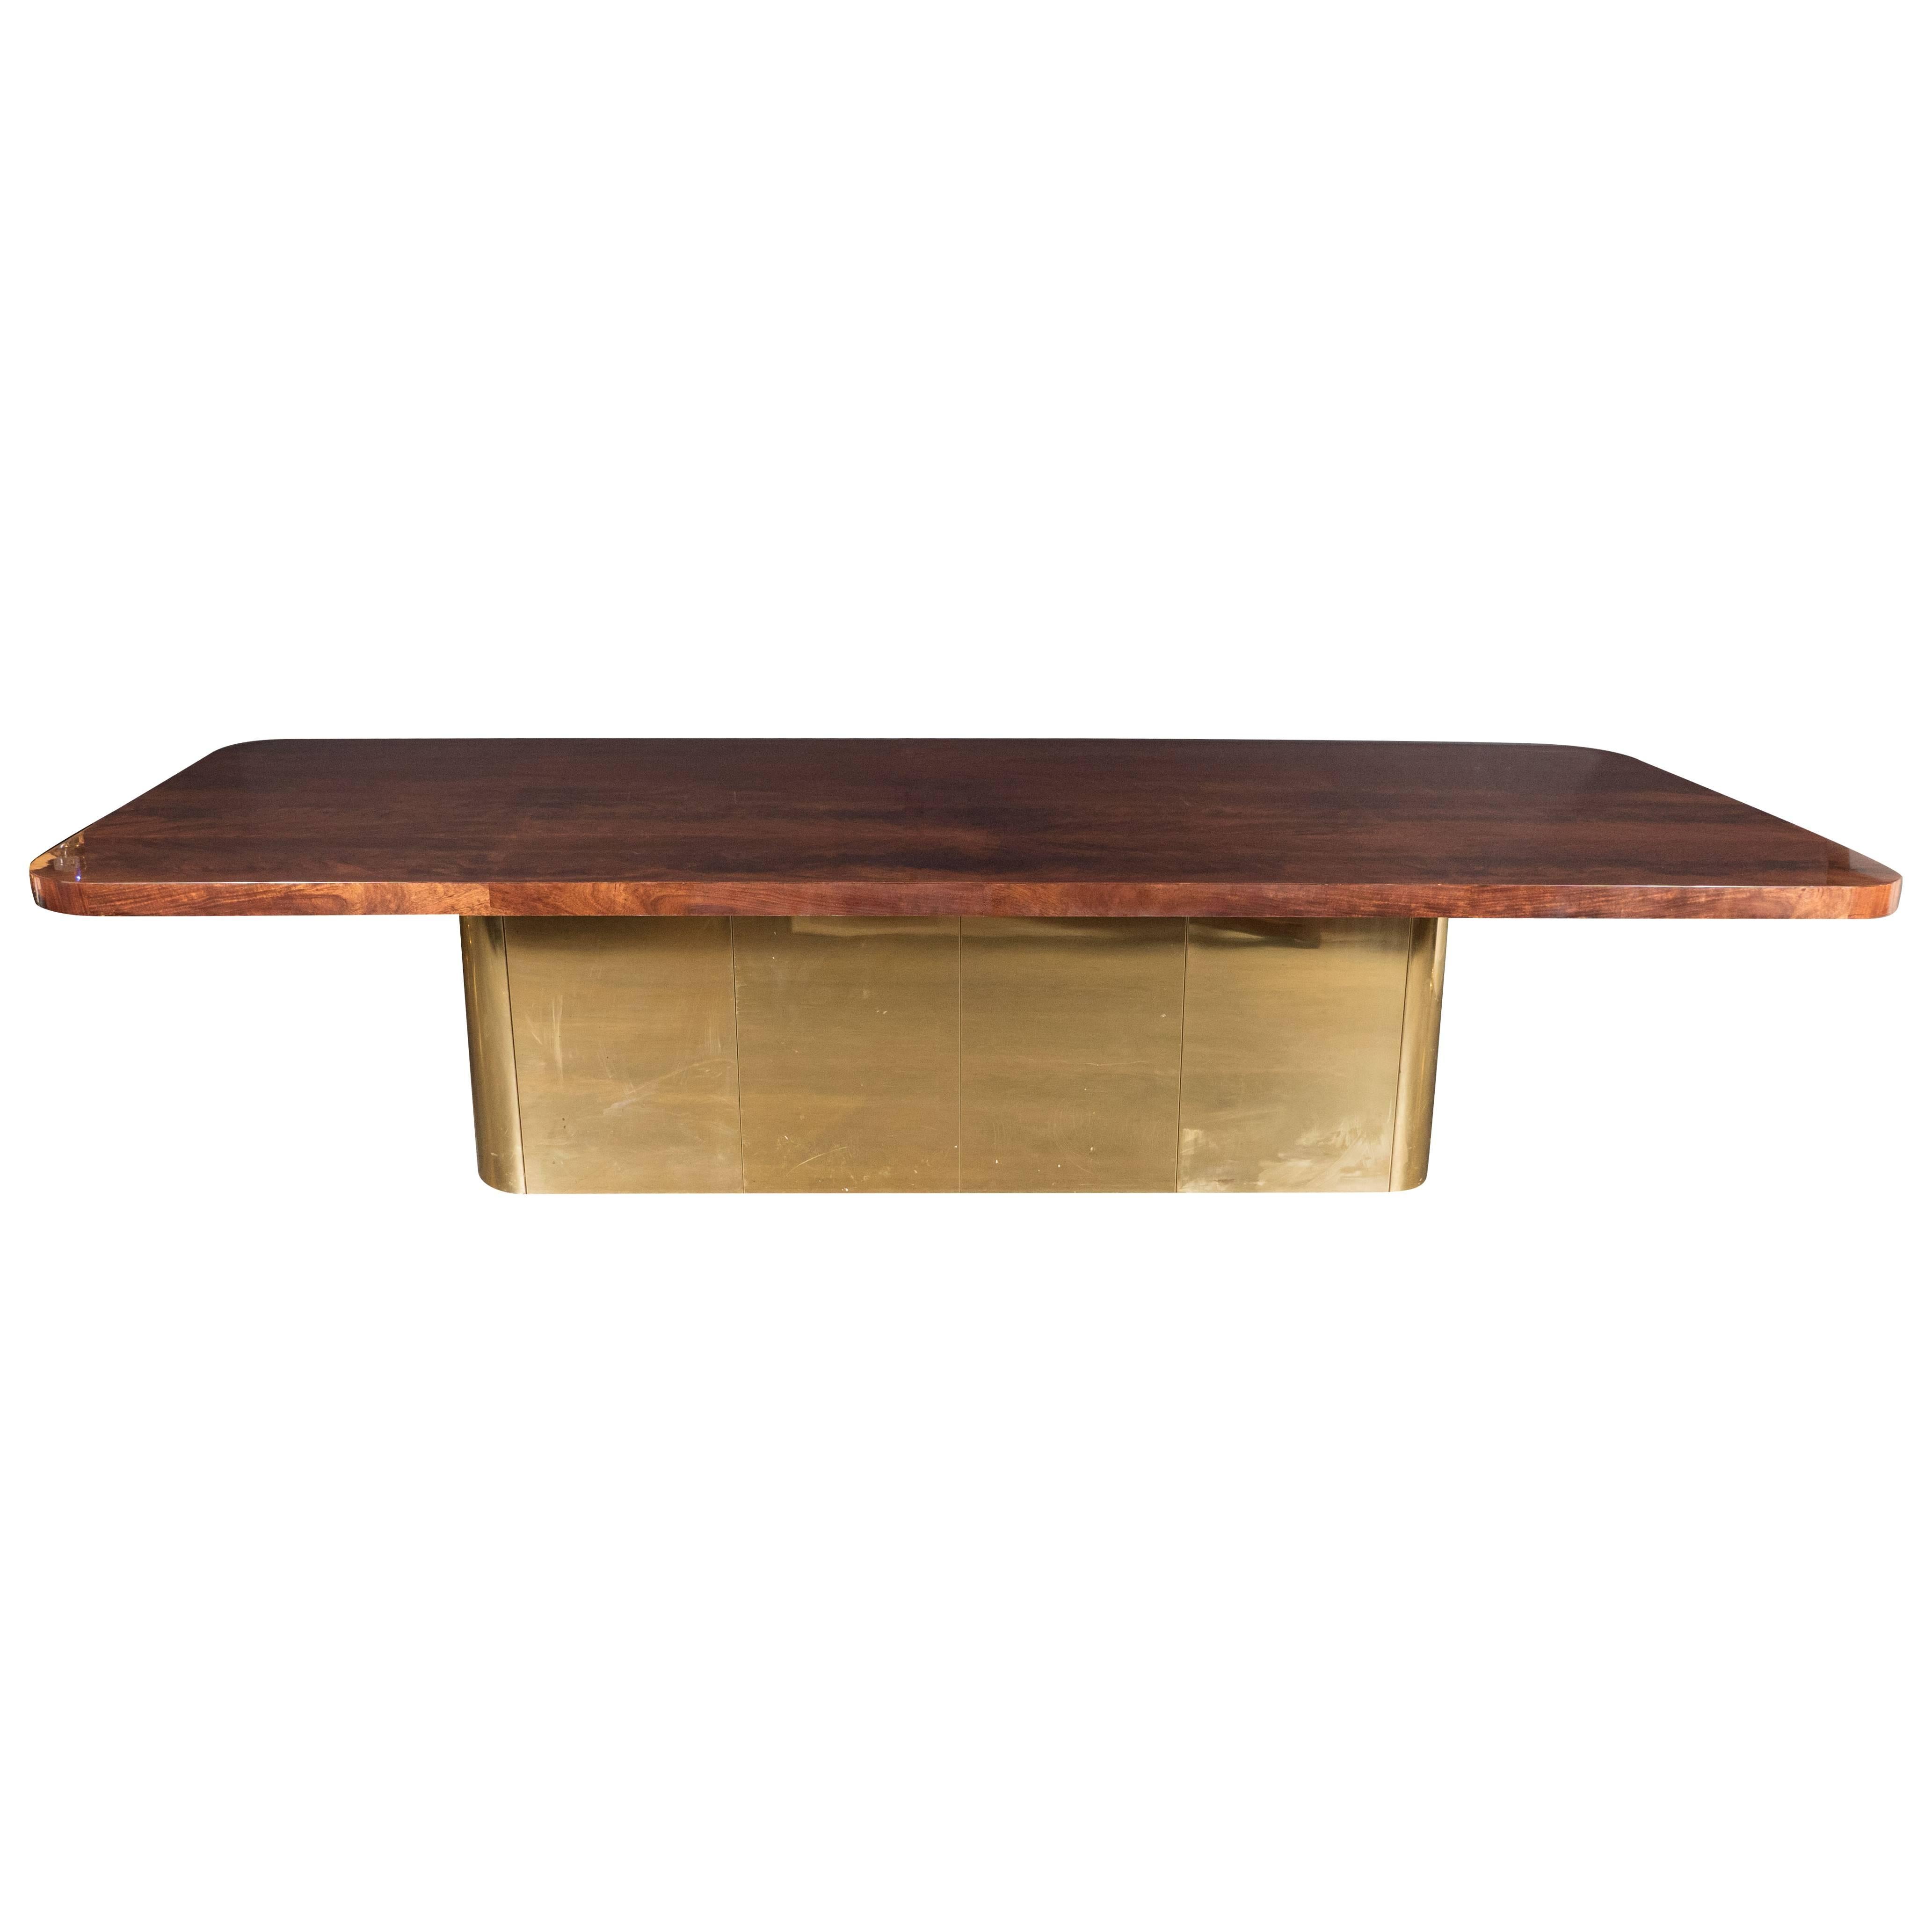 This monumental Mid-Century Modern dining table has a top constructed from gorgeous burled and bookmatched walnut and a rectangular streamlined form base with rounded edges in brass, creating a stunning material contrast to the woodgrain. This